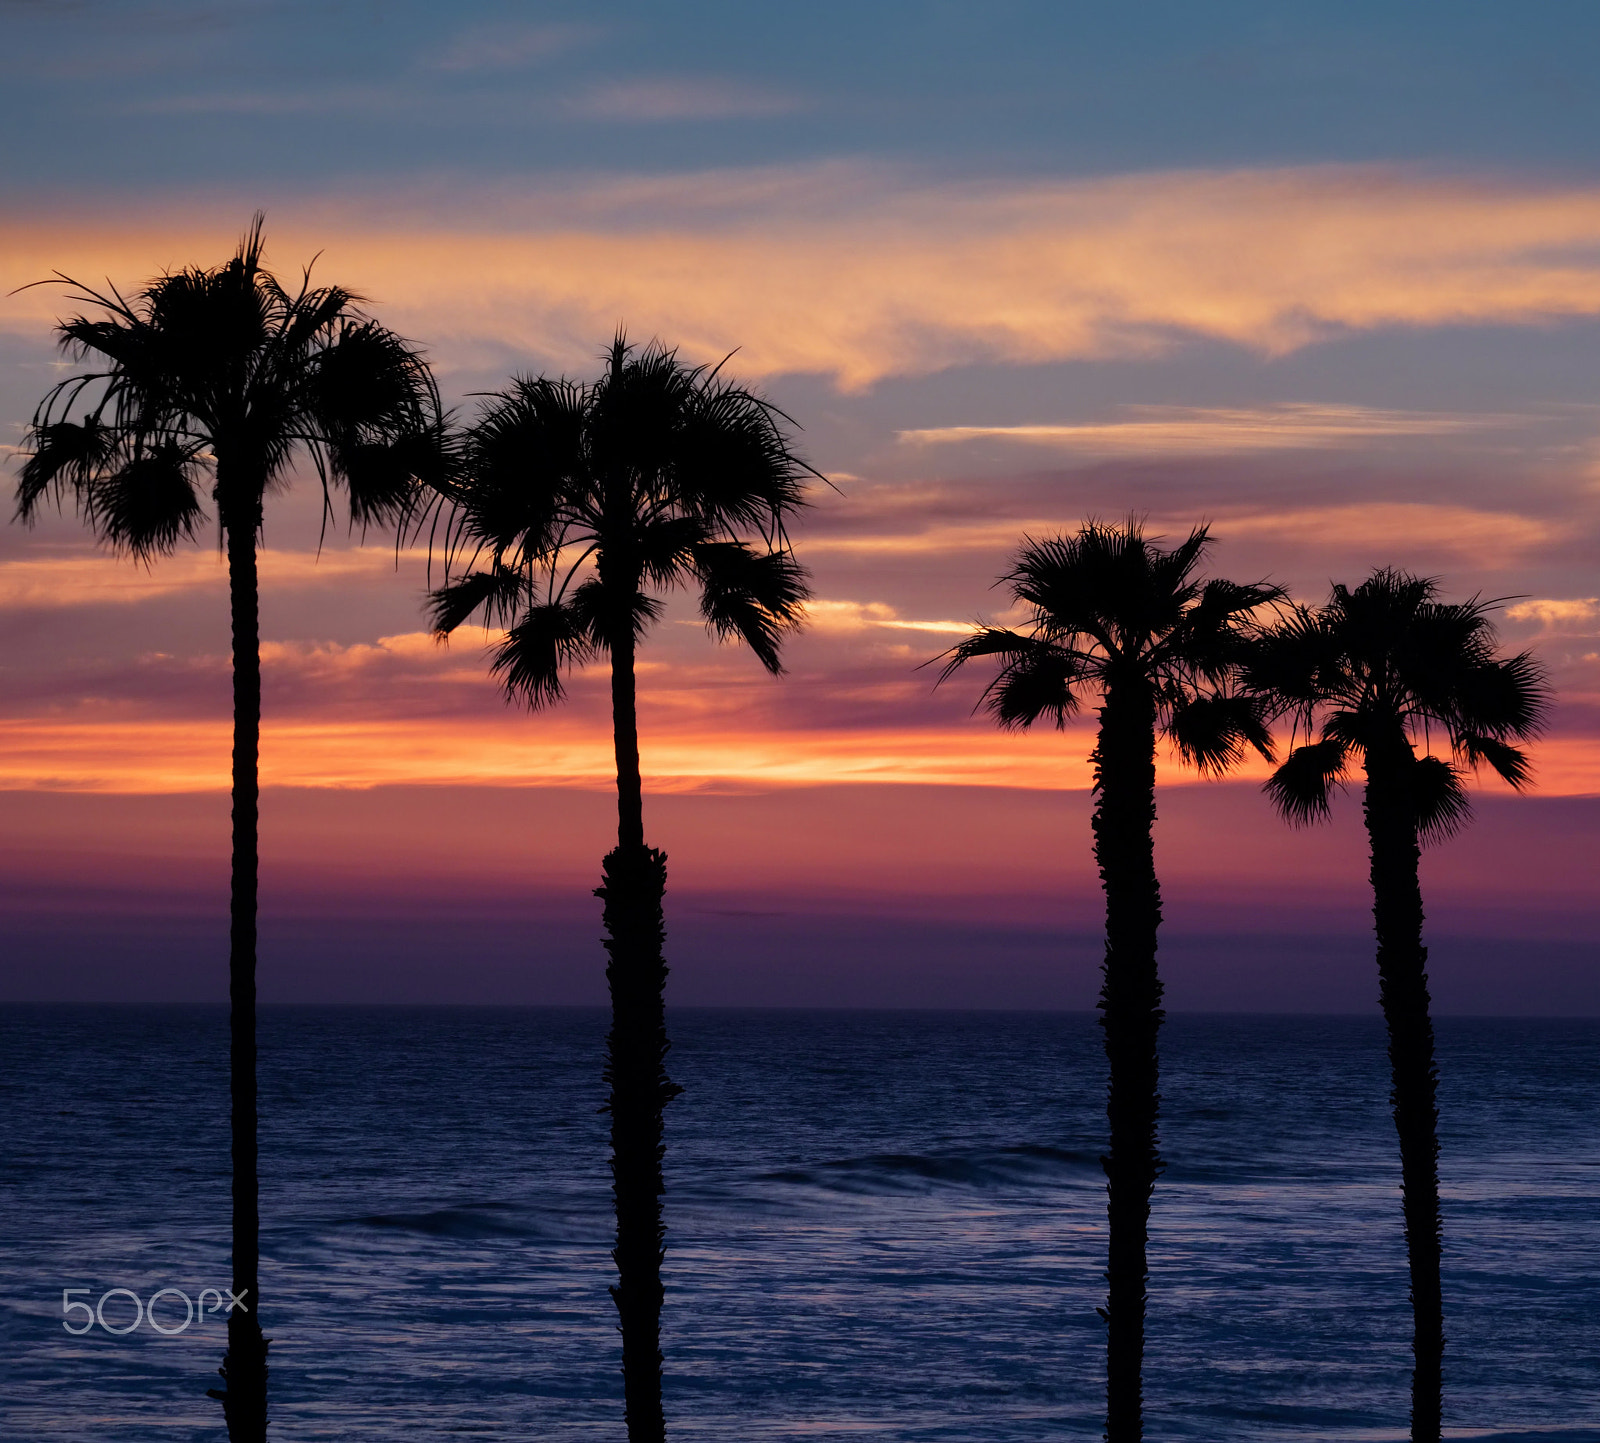 Canon EOS 5DS R + Sigma 24-105mm f/4 DG OS HSM | A sample photo. Oceanside photography